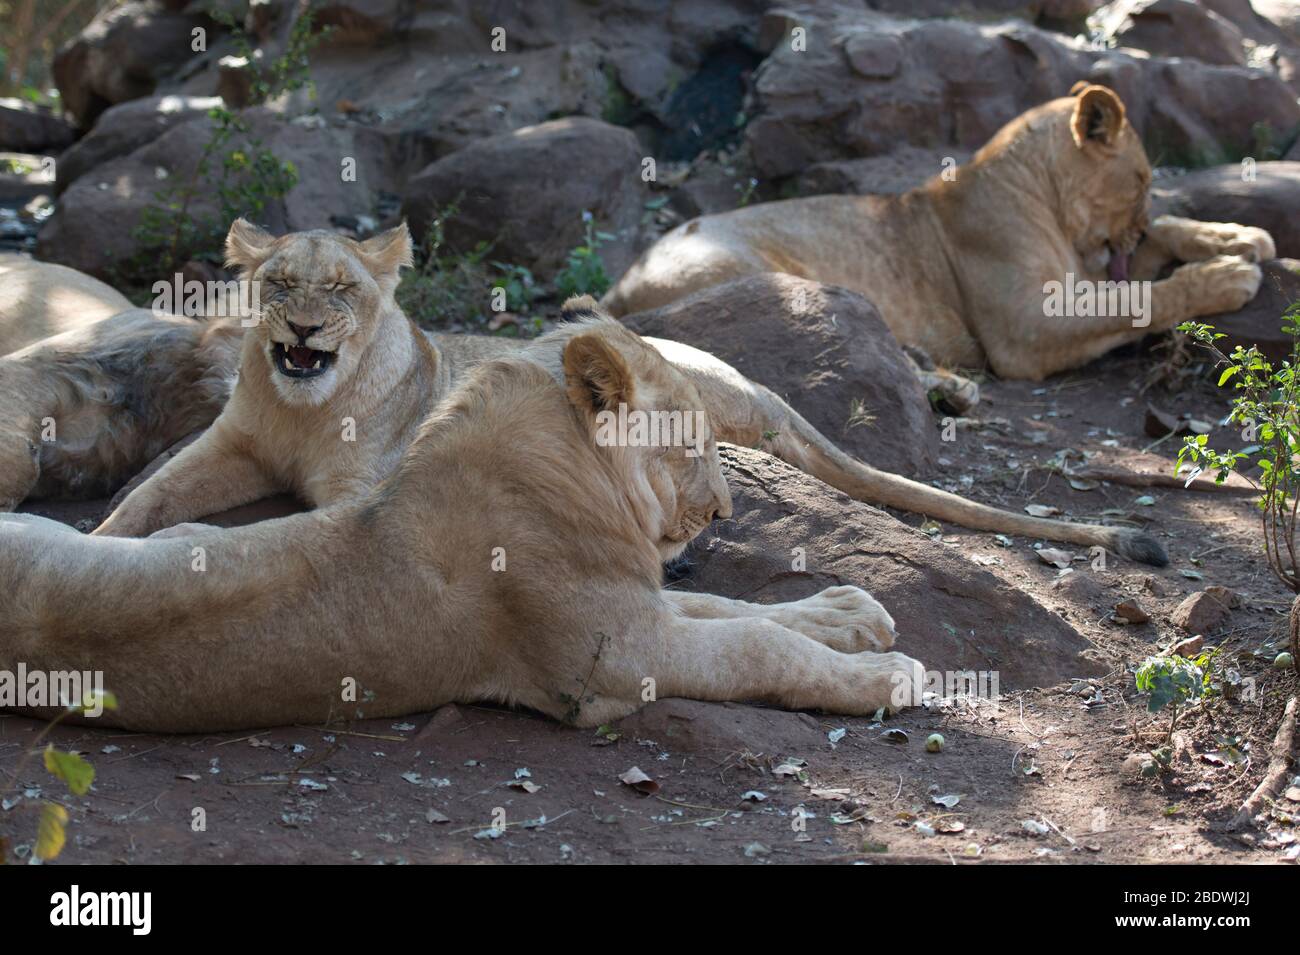 Lions, Panthera leo, Tzaneen Lion and Predator Park, near Tzaneen, Tzaneen district, Limpopo province, South Africa Stock Photo